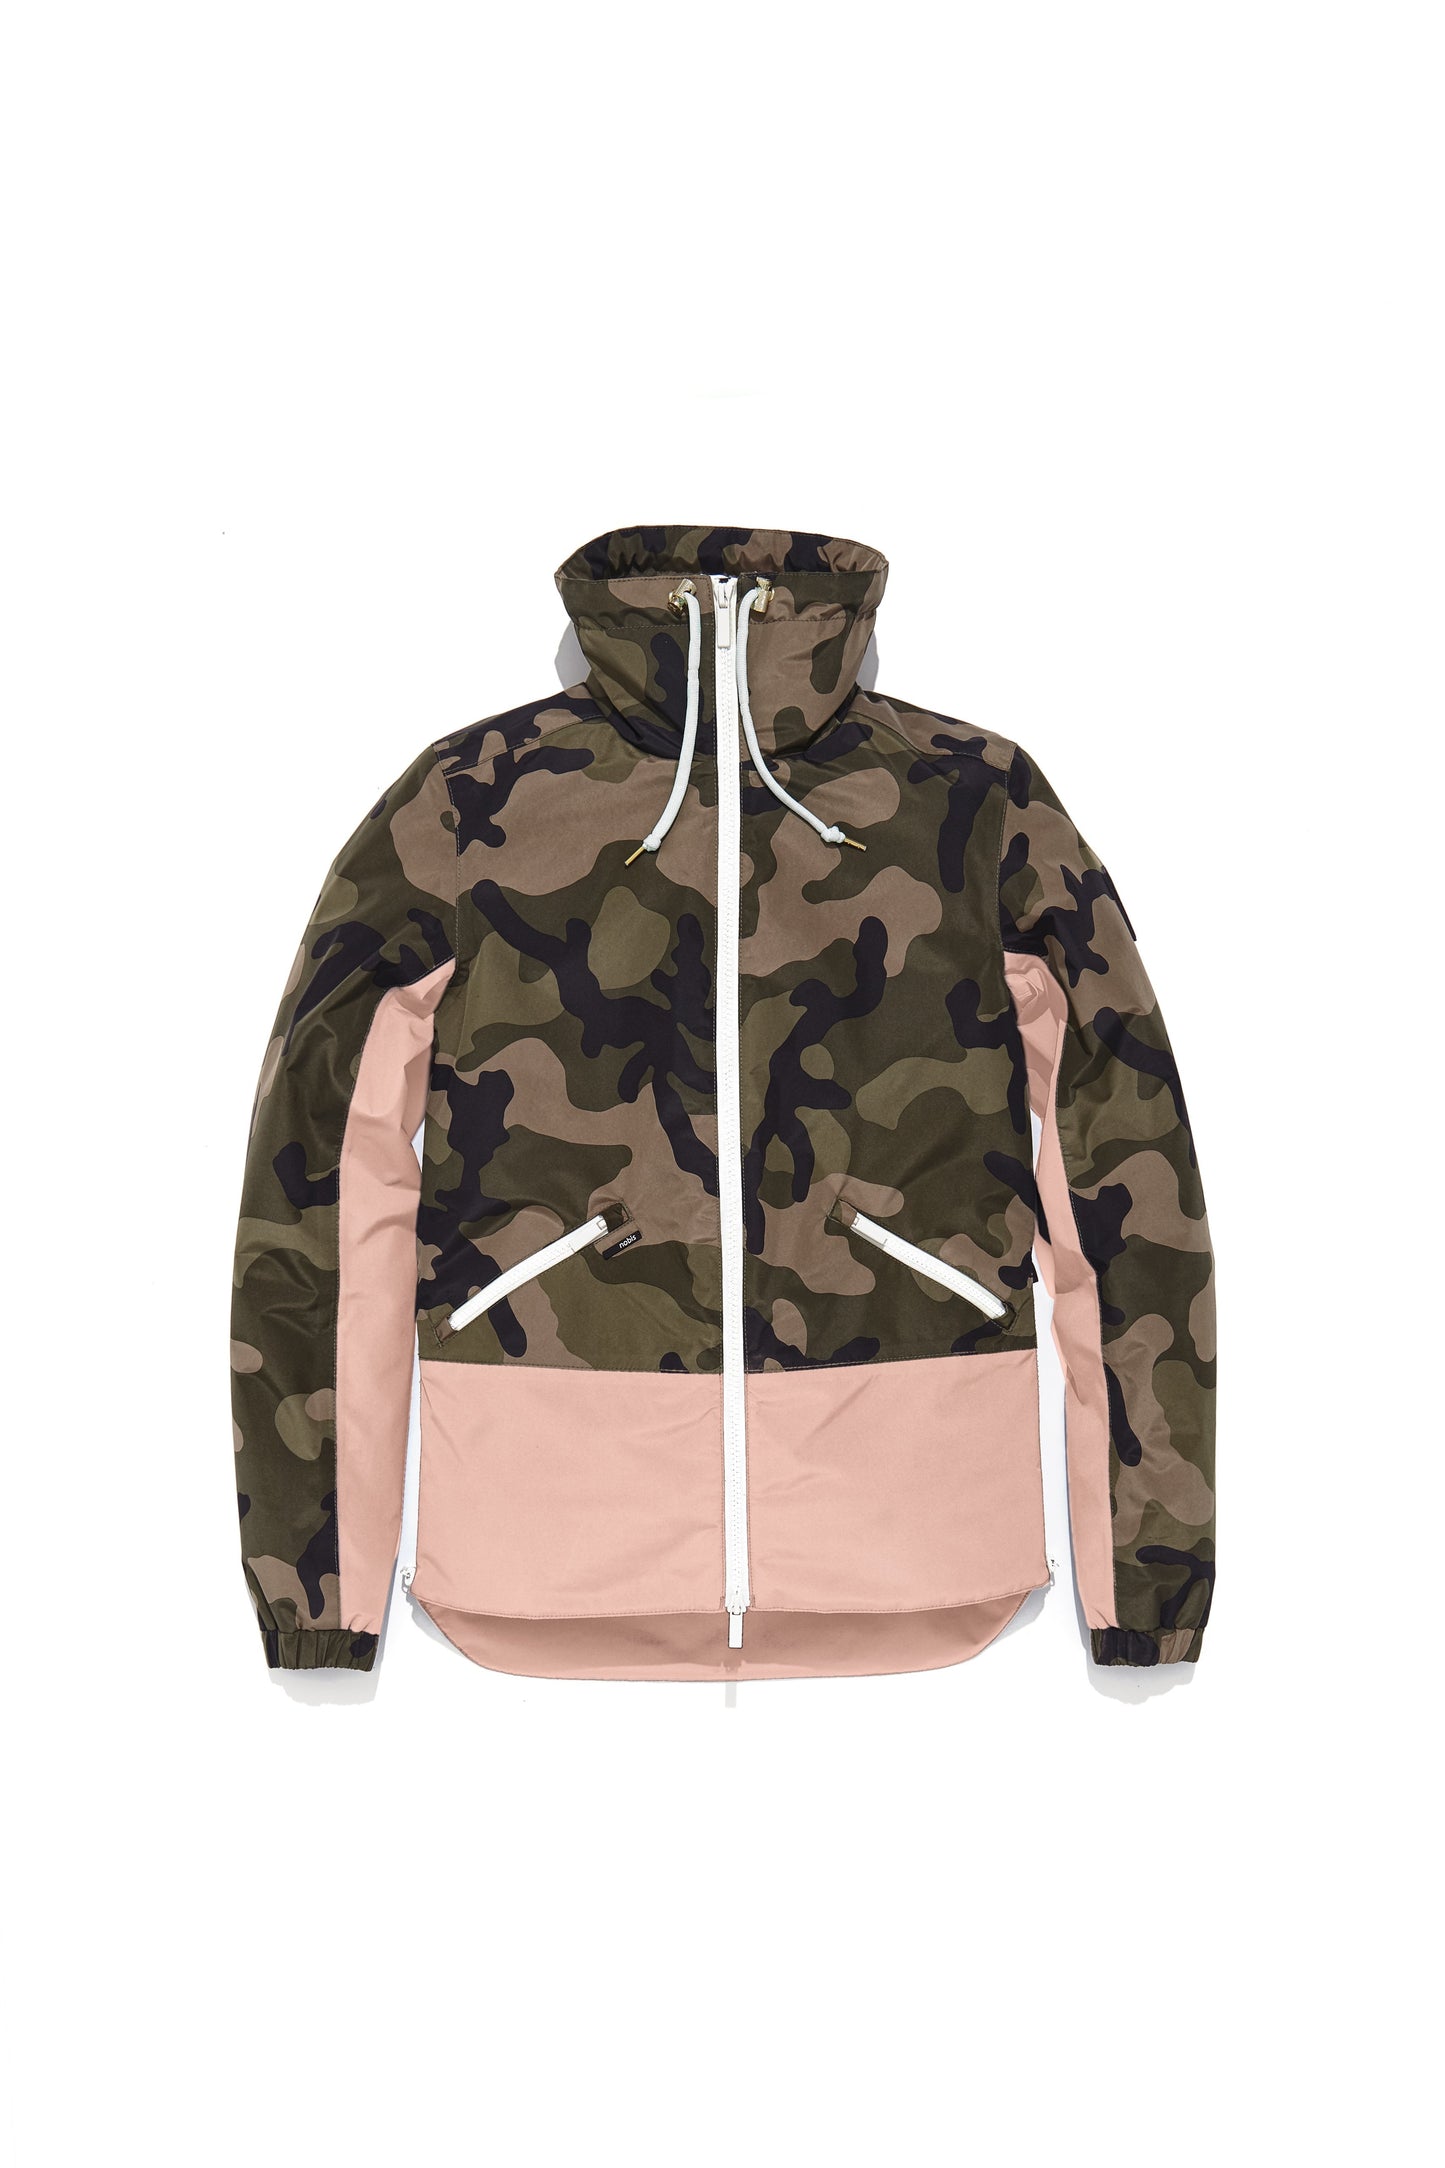 Leah waist length women's jacket in the Camo/Shell Pink color